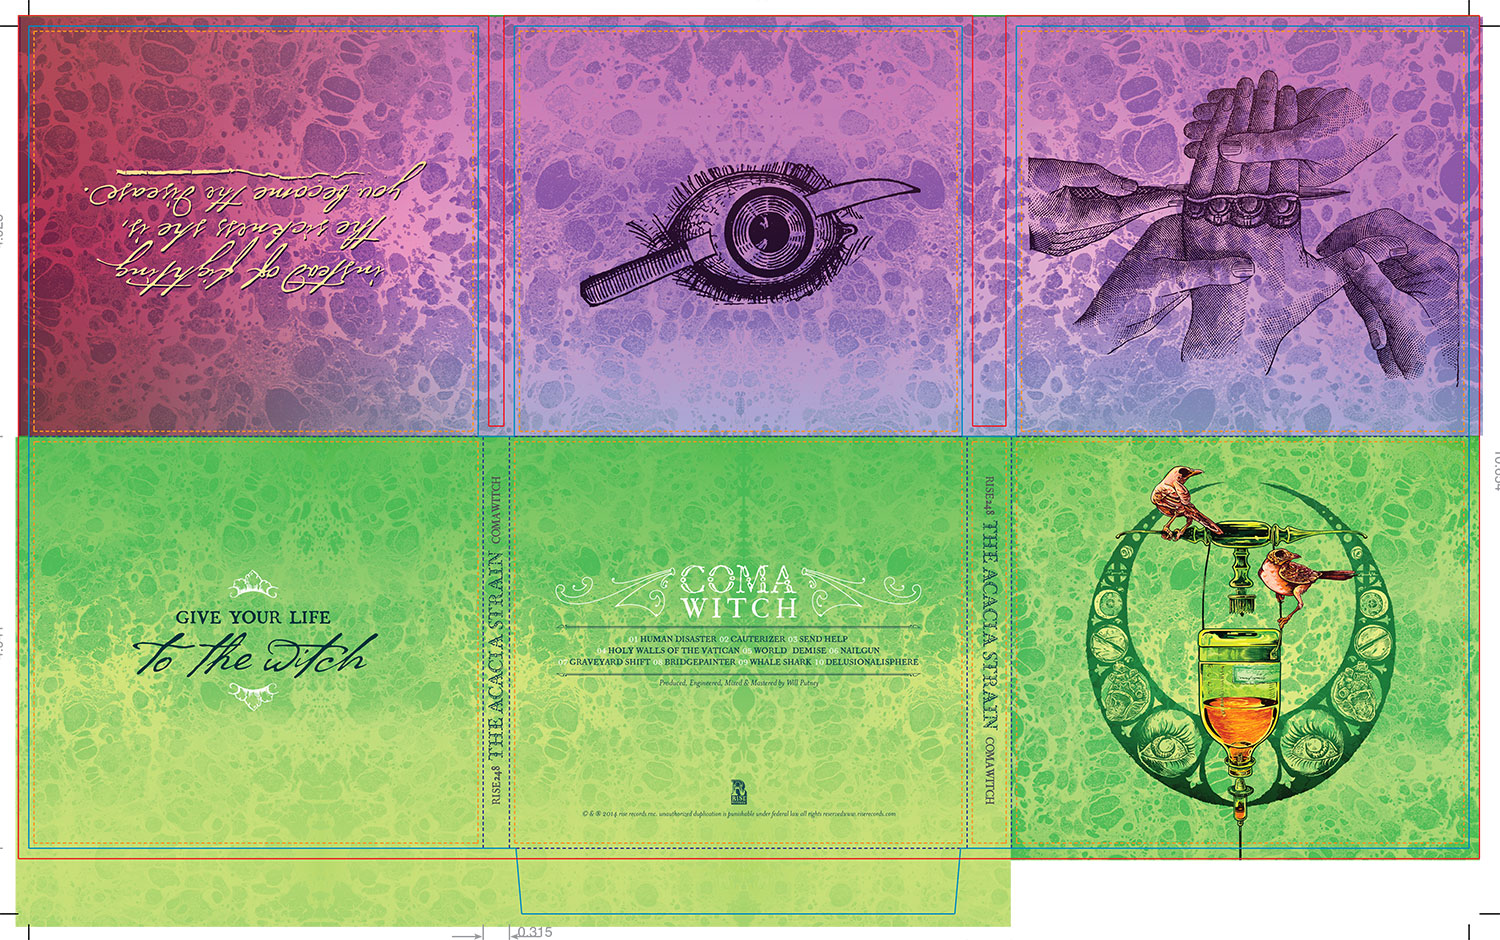 Digipak Layout for Coma Witch